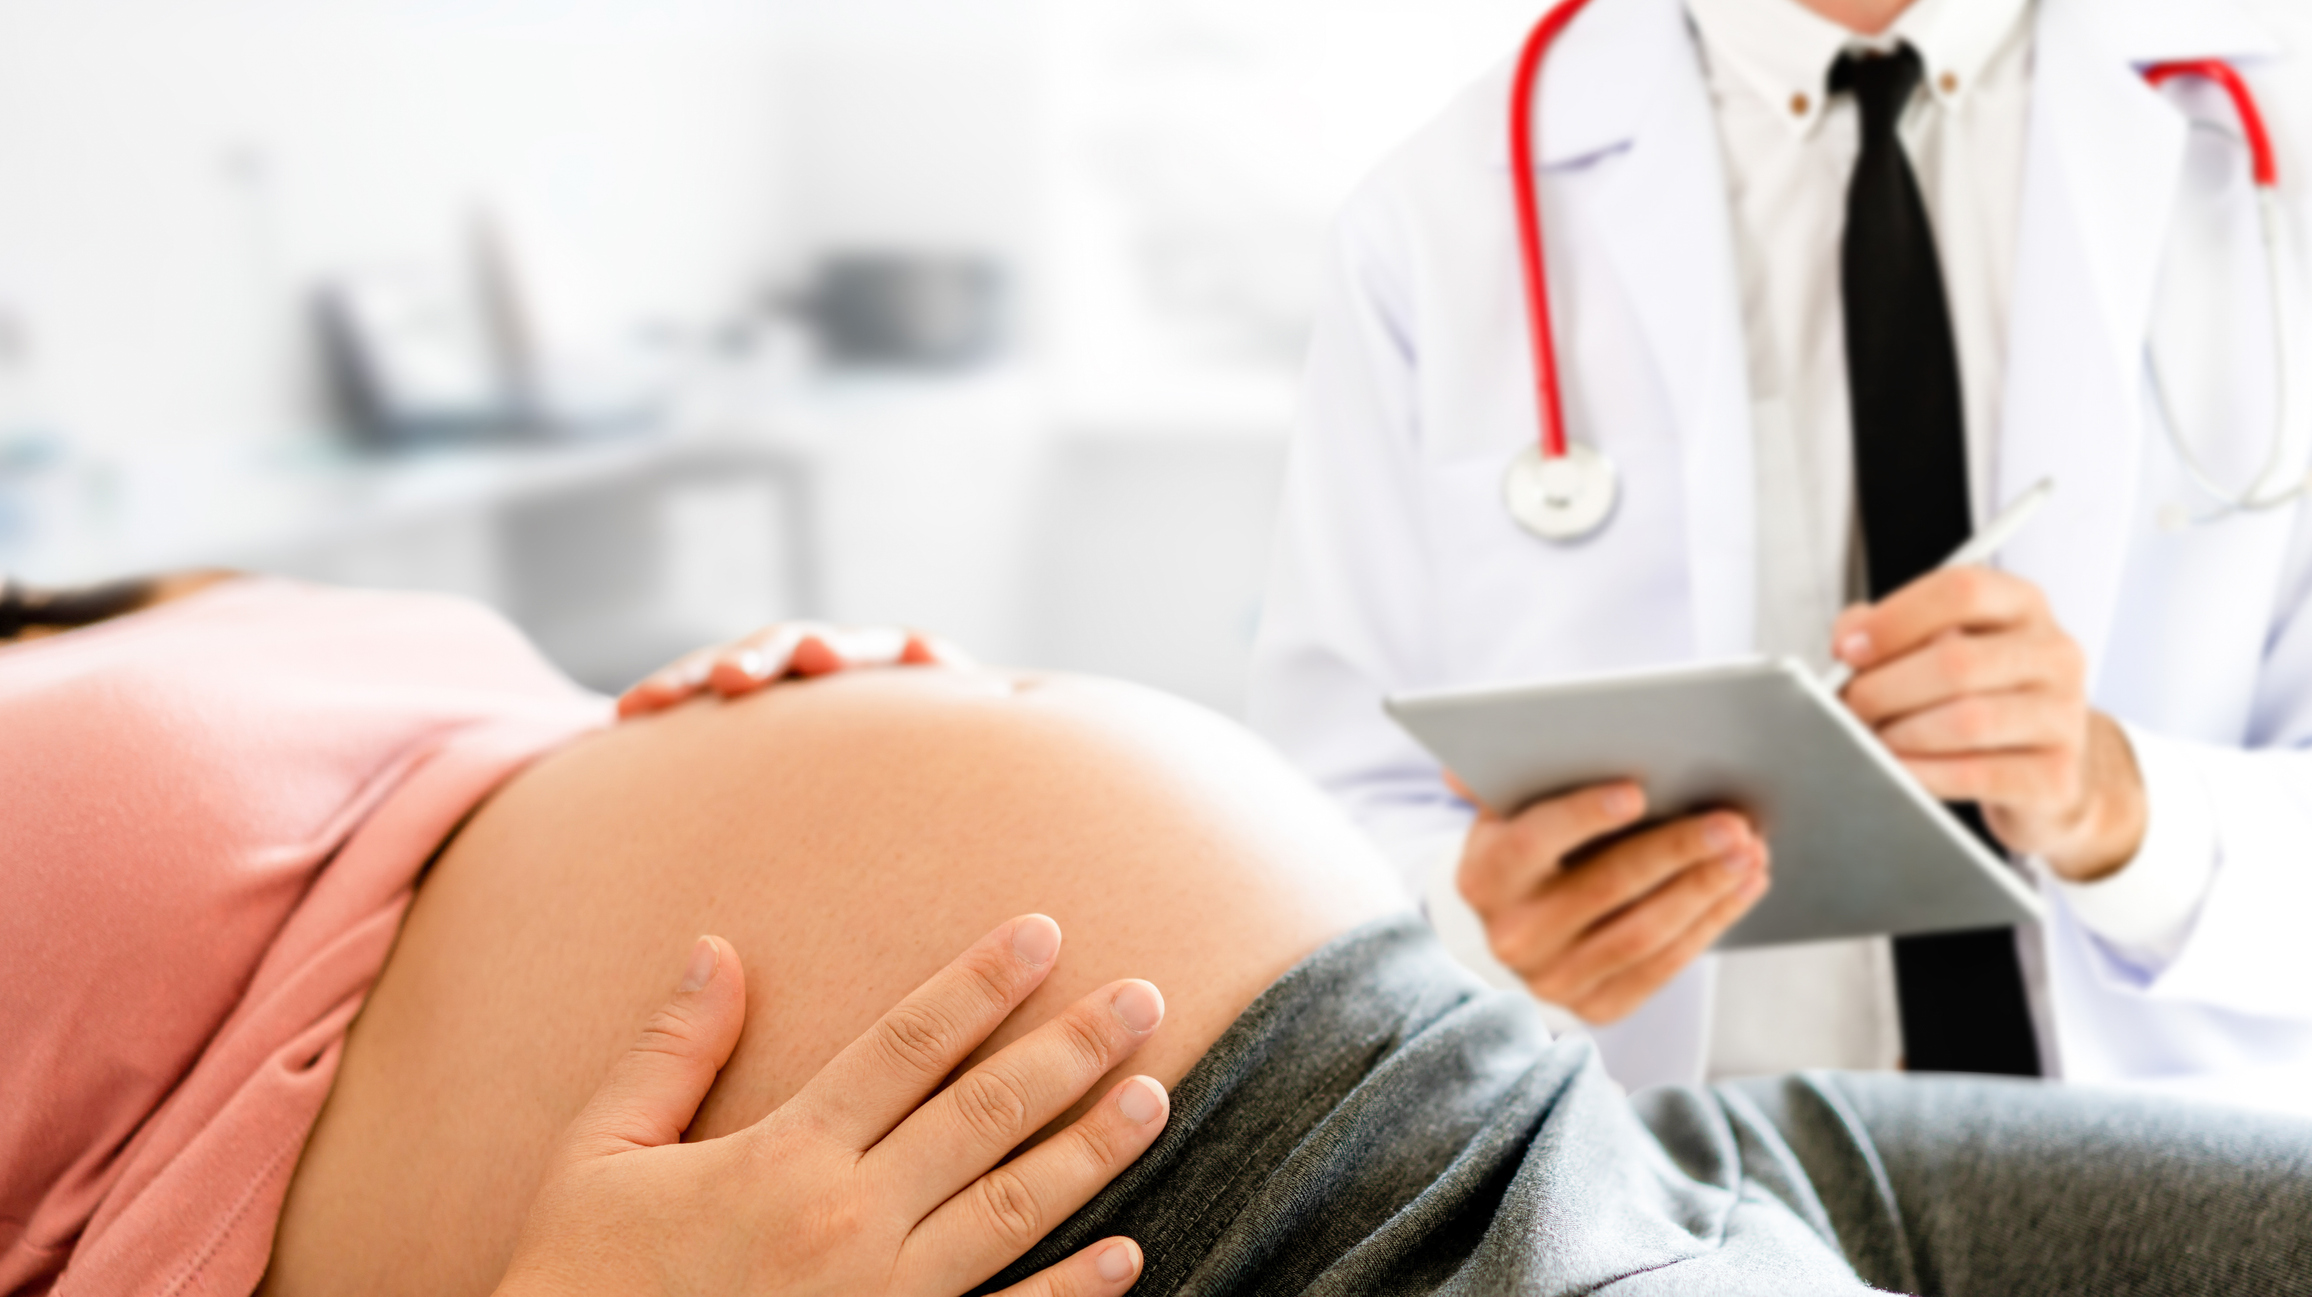 Pregnant Woman and Gynecologist Doctor at Hospital - stock photo